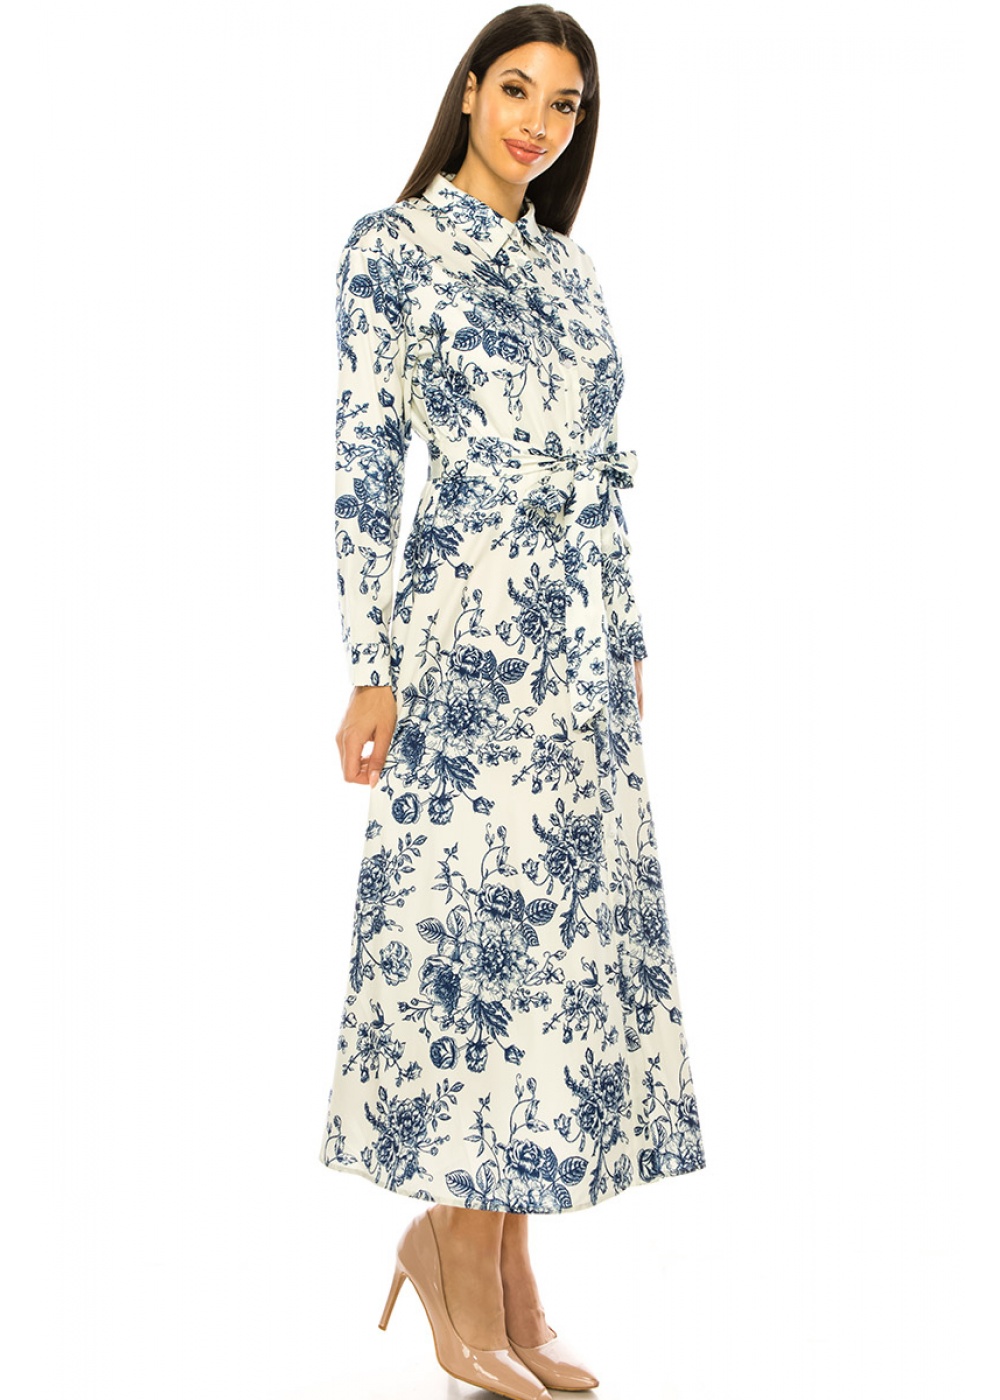 White Maxi Dress With Blue Floral Print